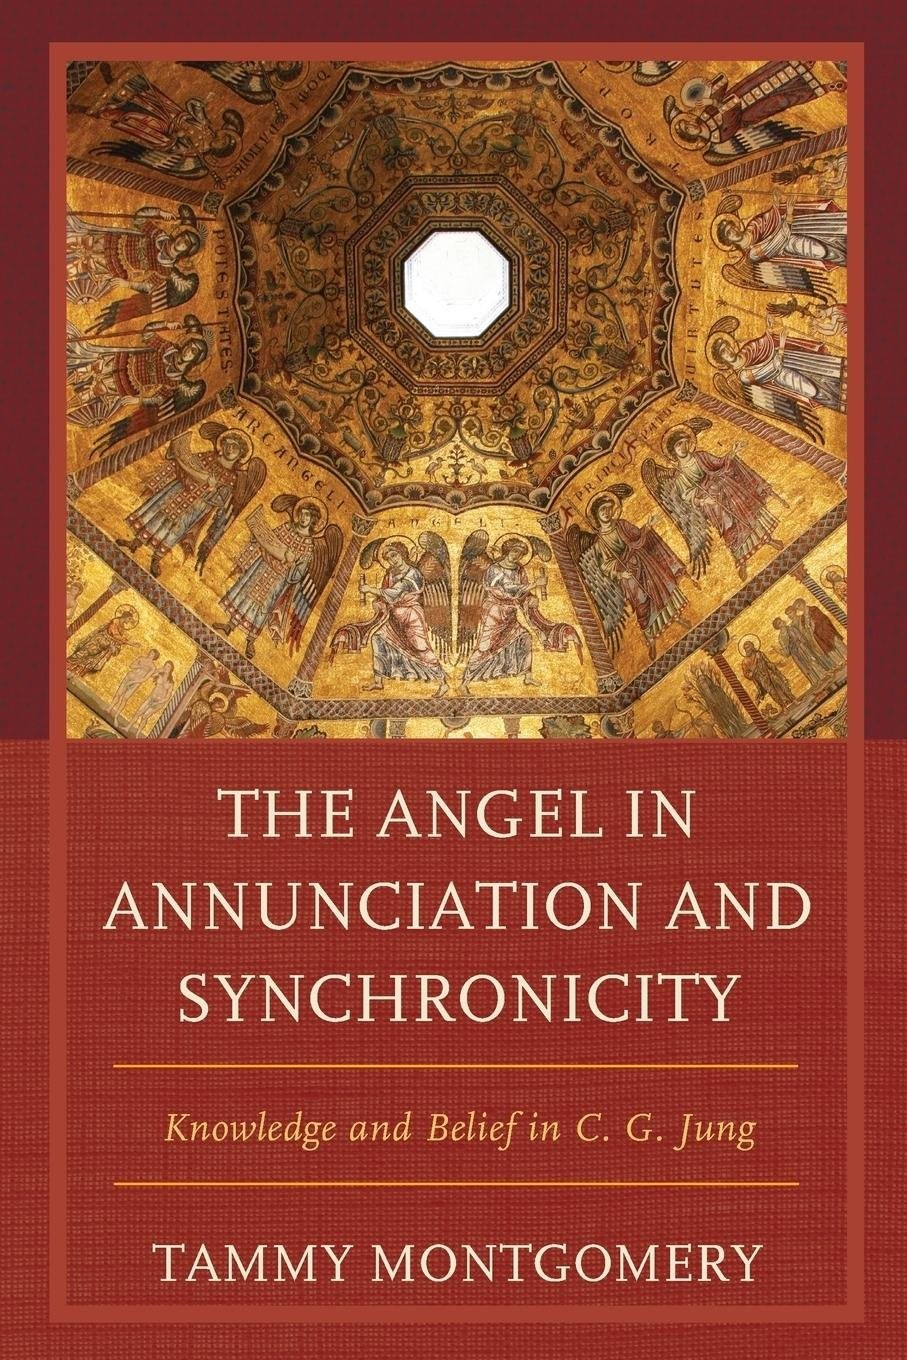 The Angel in Annunciation and Synchronicity: Knowledge and Belief in C. G. Jung